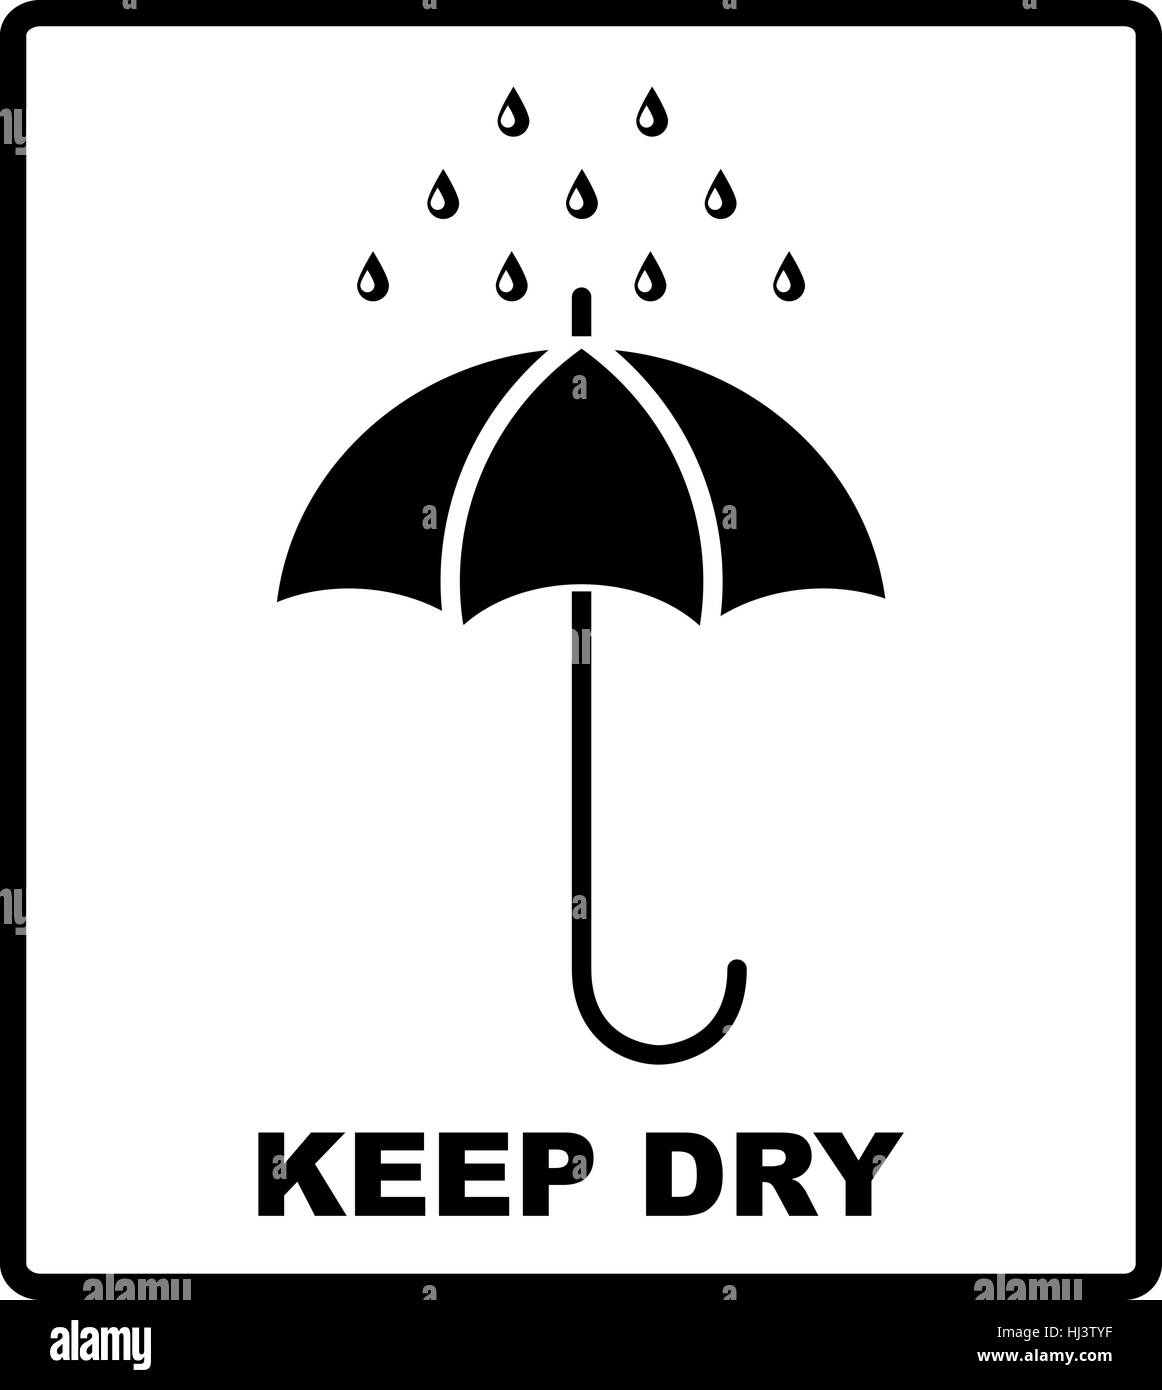 Vector icon packaging sign keep dry with umbrella and drops. Black silhouettes, simple flat design symbol. Stock Vector